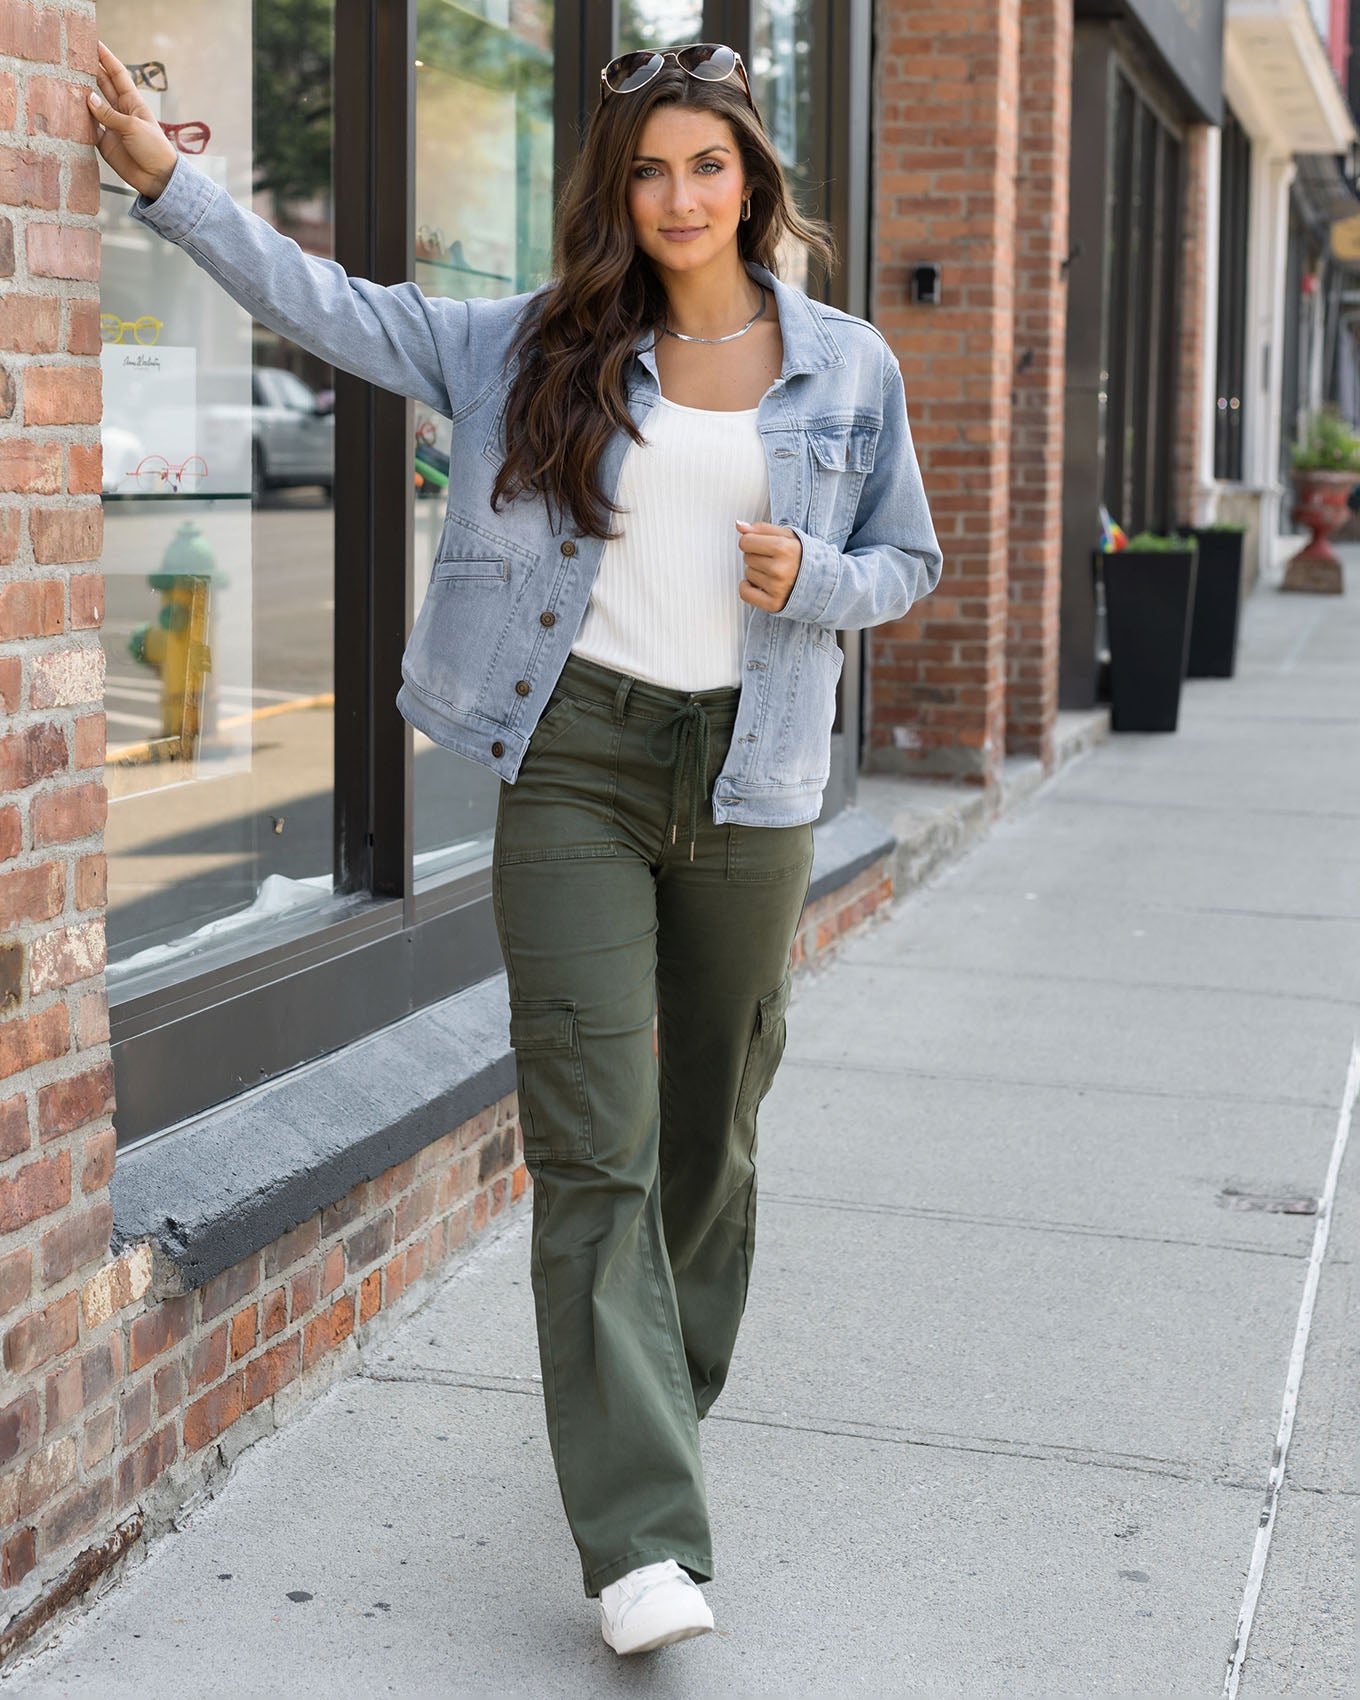 Grey Cargo Pants with Grey Shoes Outfits (16 ideas & outfits